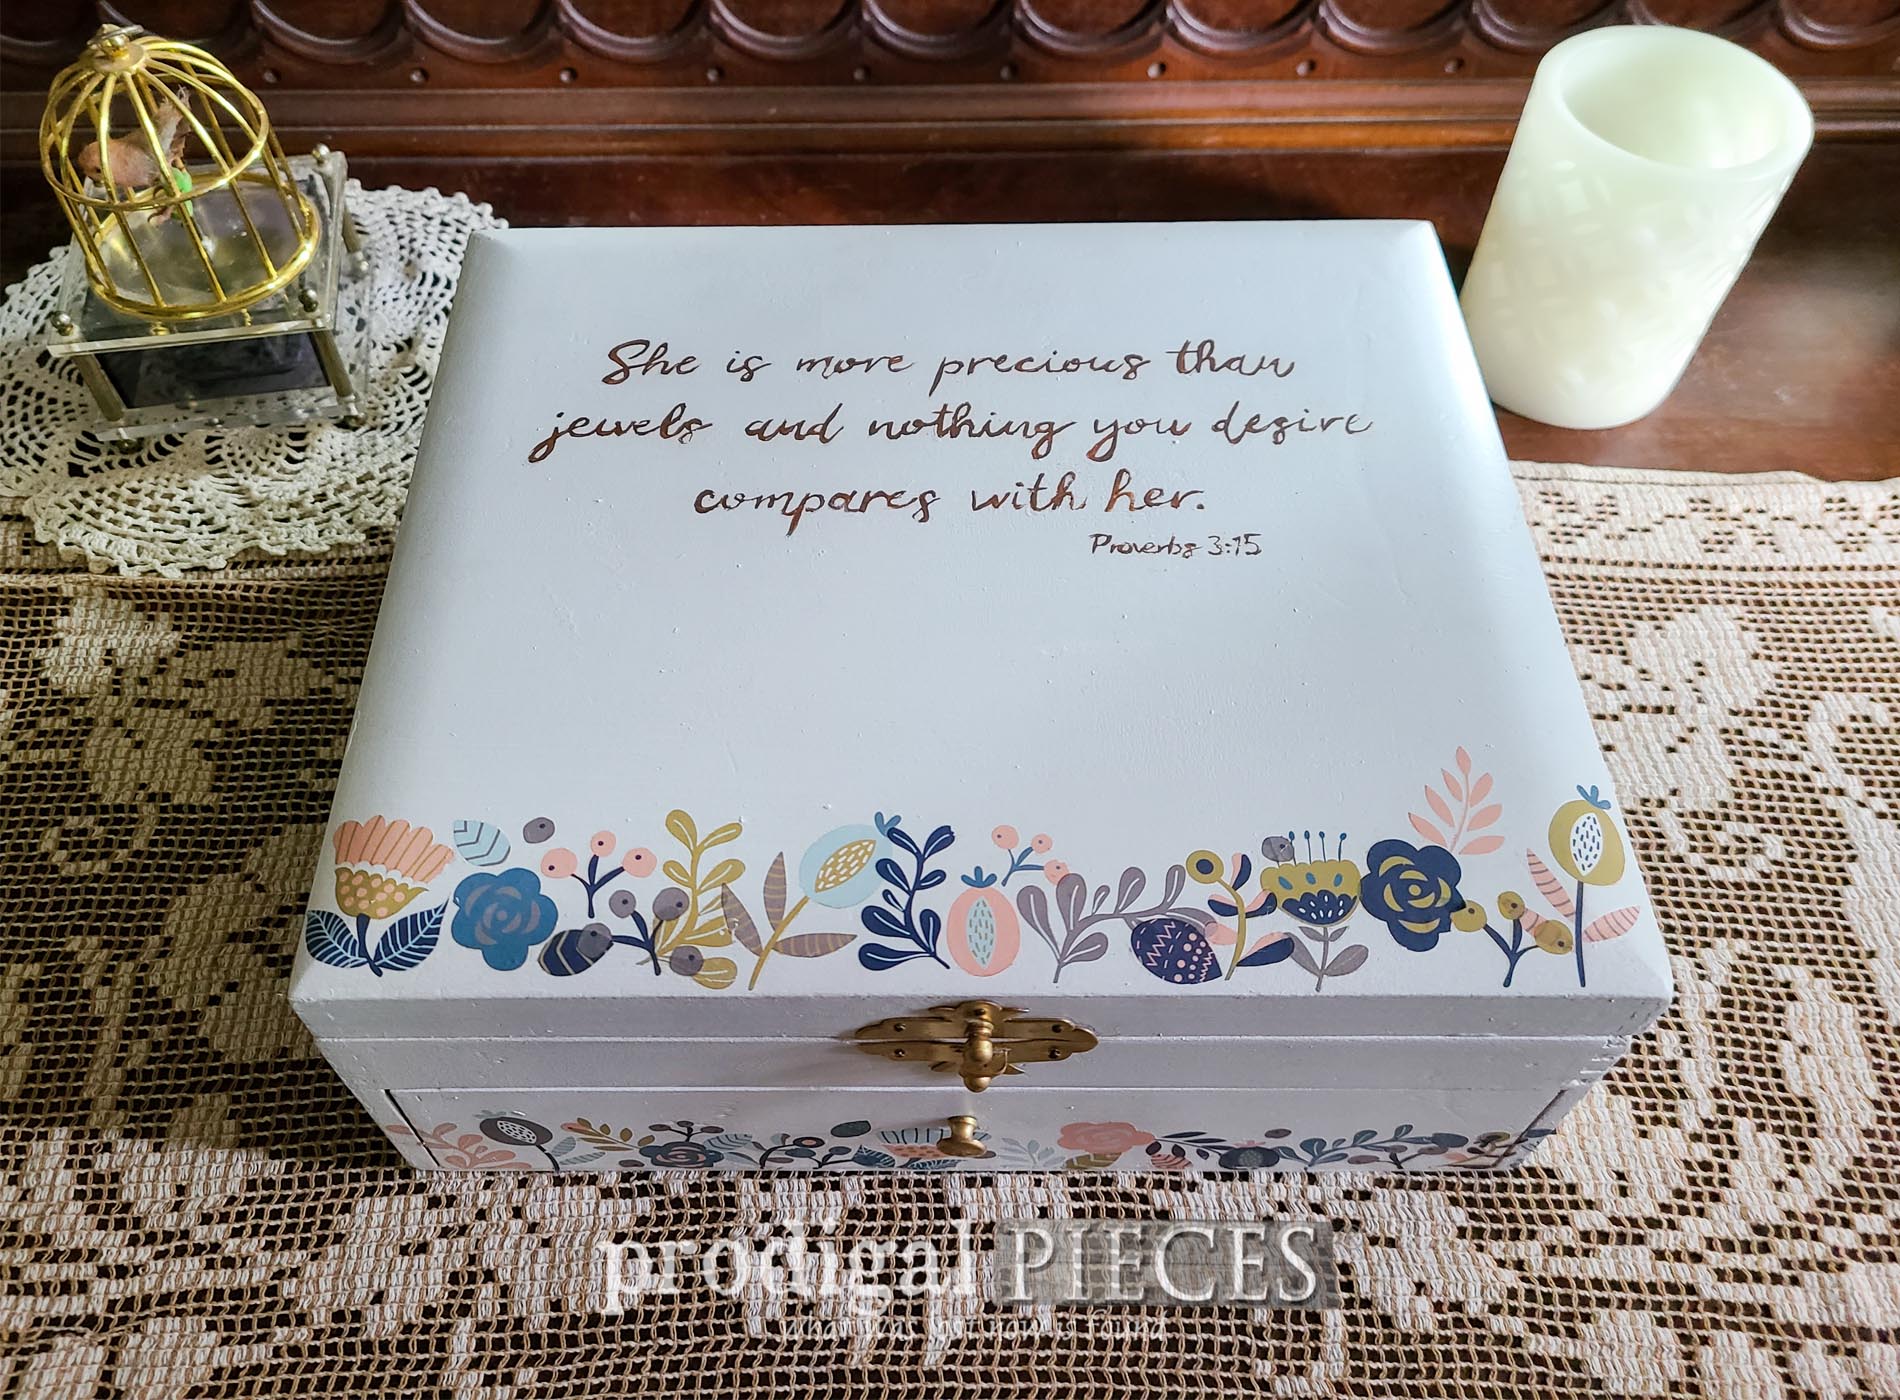 Featured DIY Jewelry Box from Upcycled Silverware Chest by Larissa of Prodigal Pieces | prodigalpieces.com #prodigalpieces #diy #upcycled #jewelry